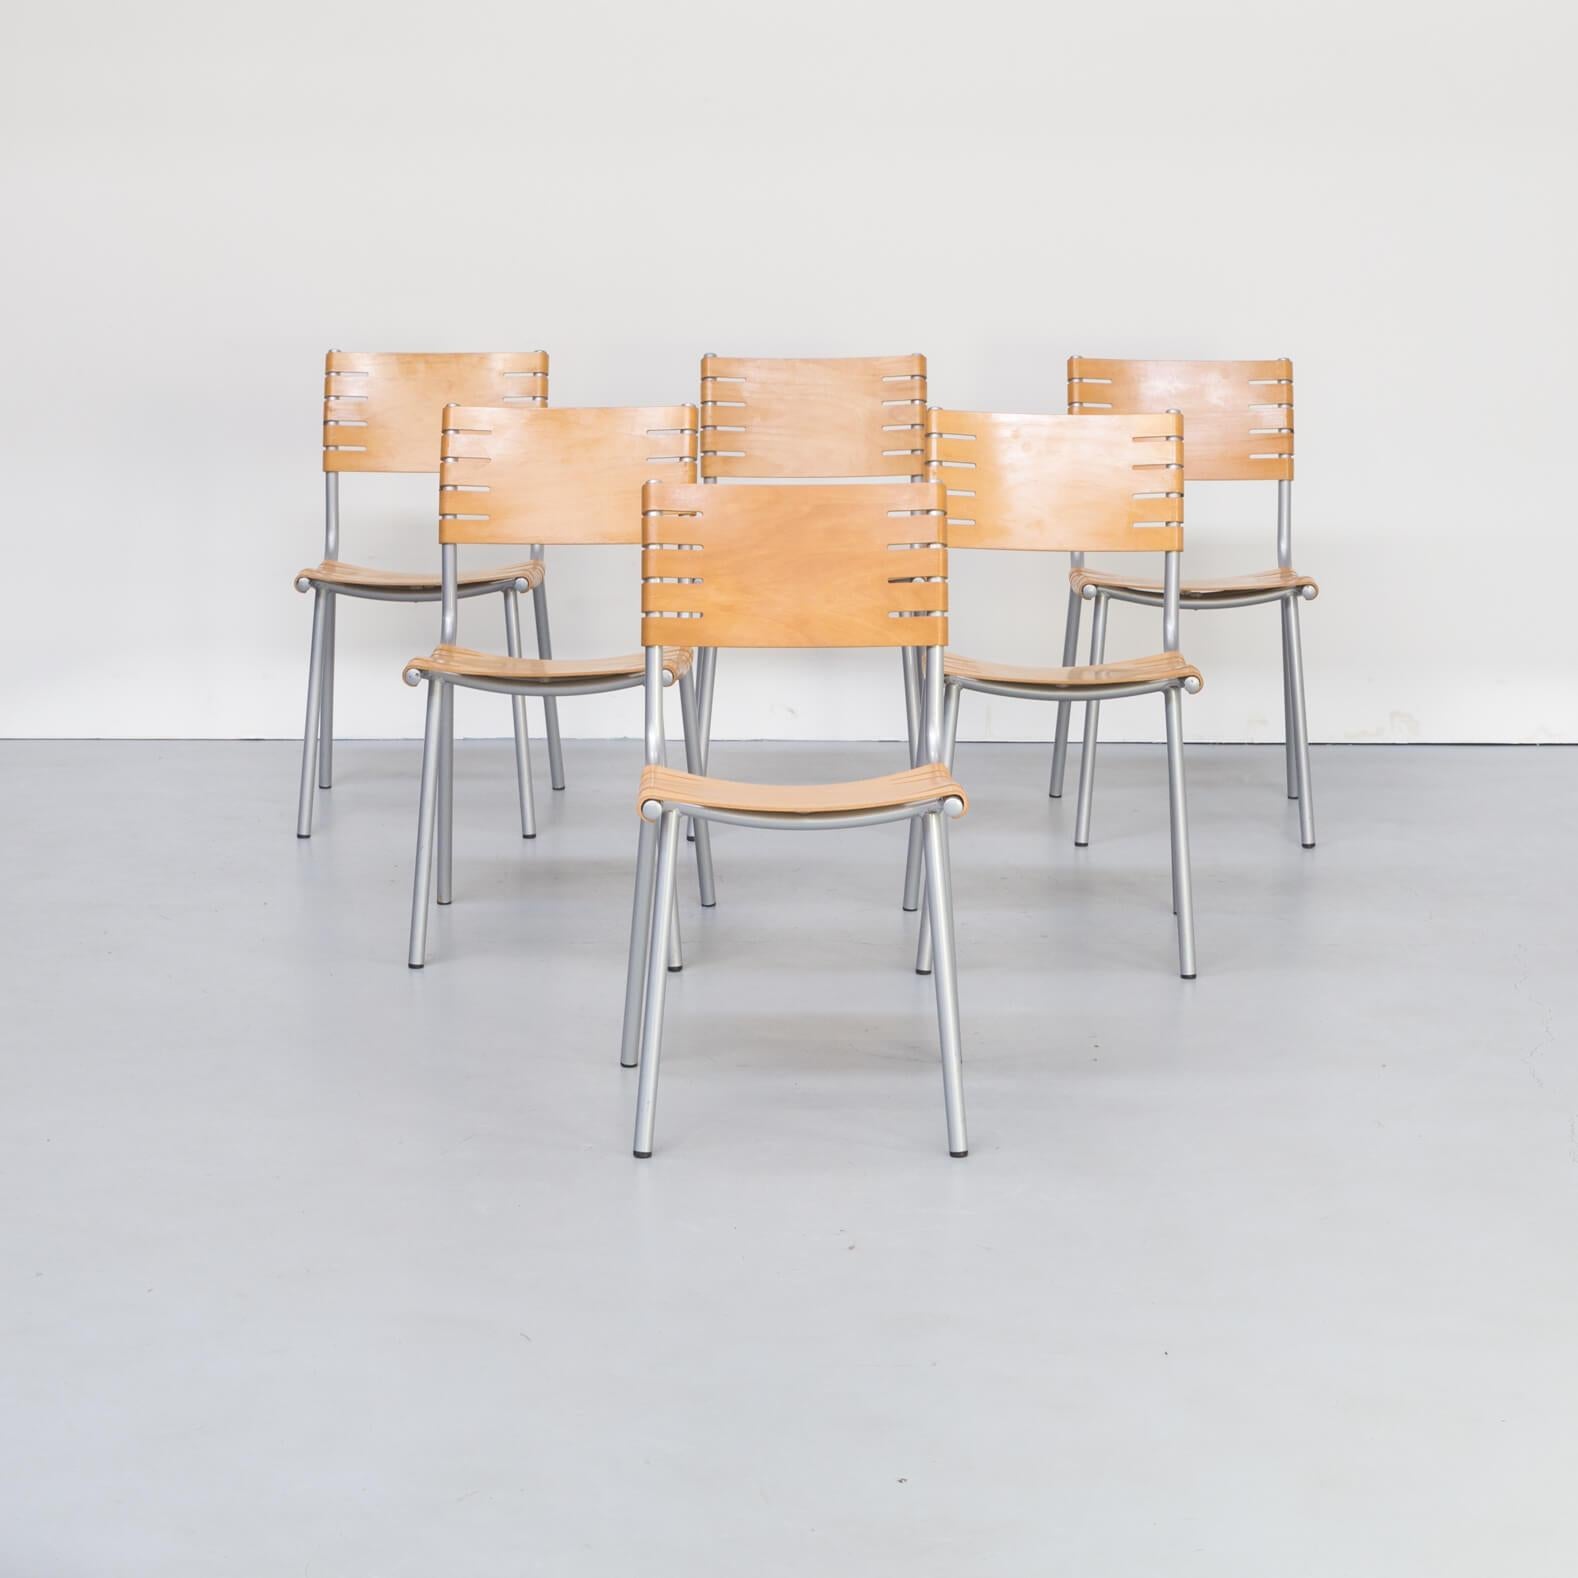 Mid-Century Modern 1990s Ruud Jan Kokke Dining Chair for Harvink Set of 6 For Sale